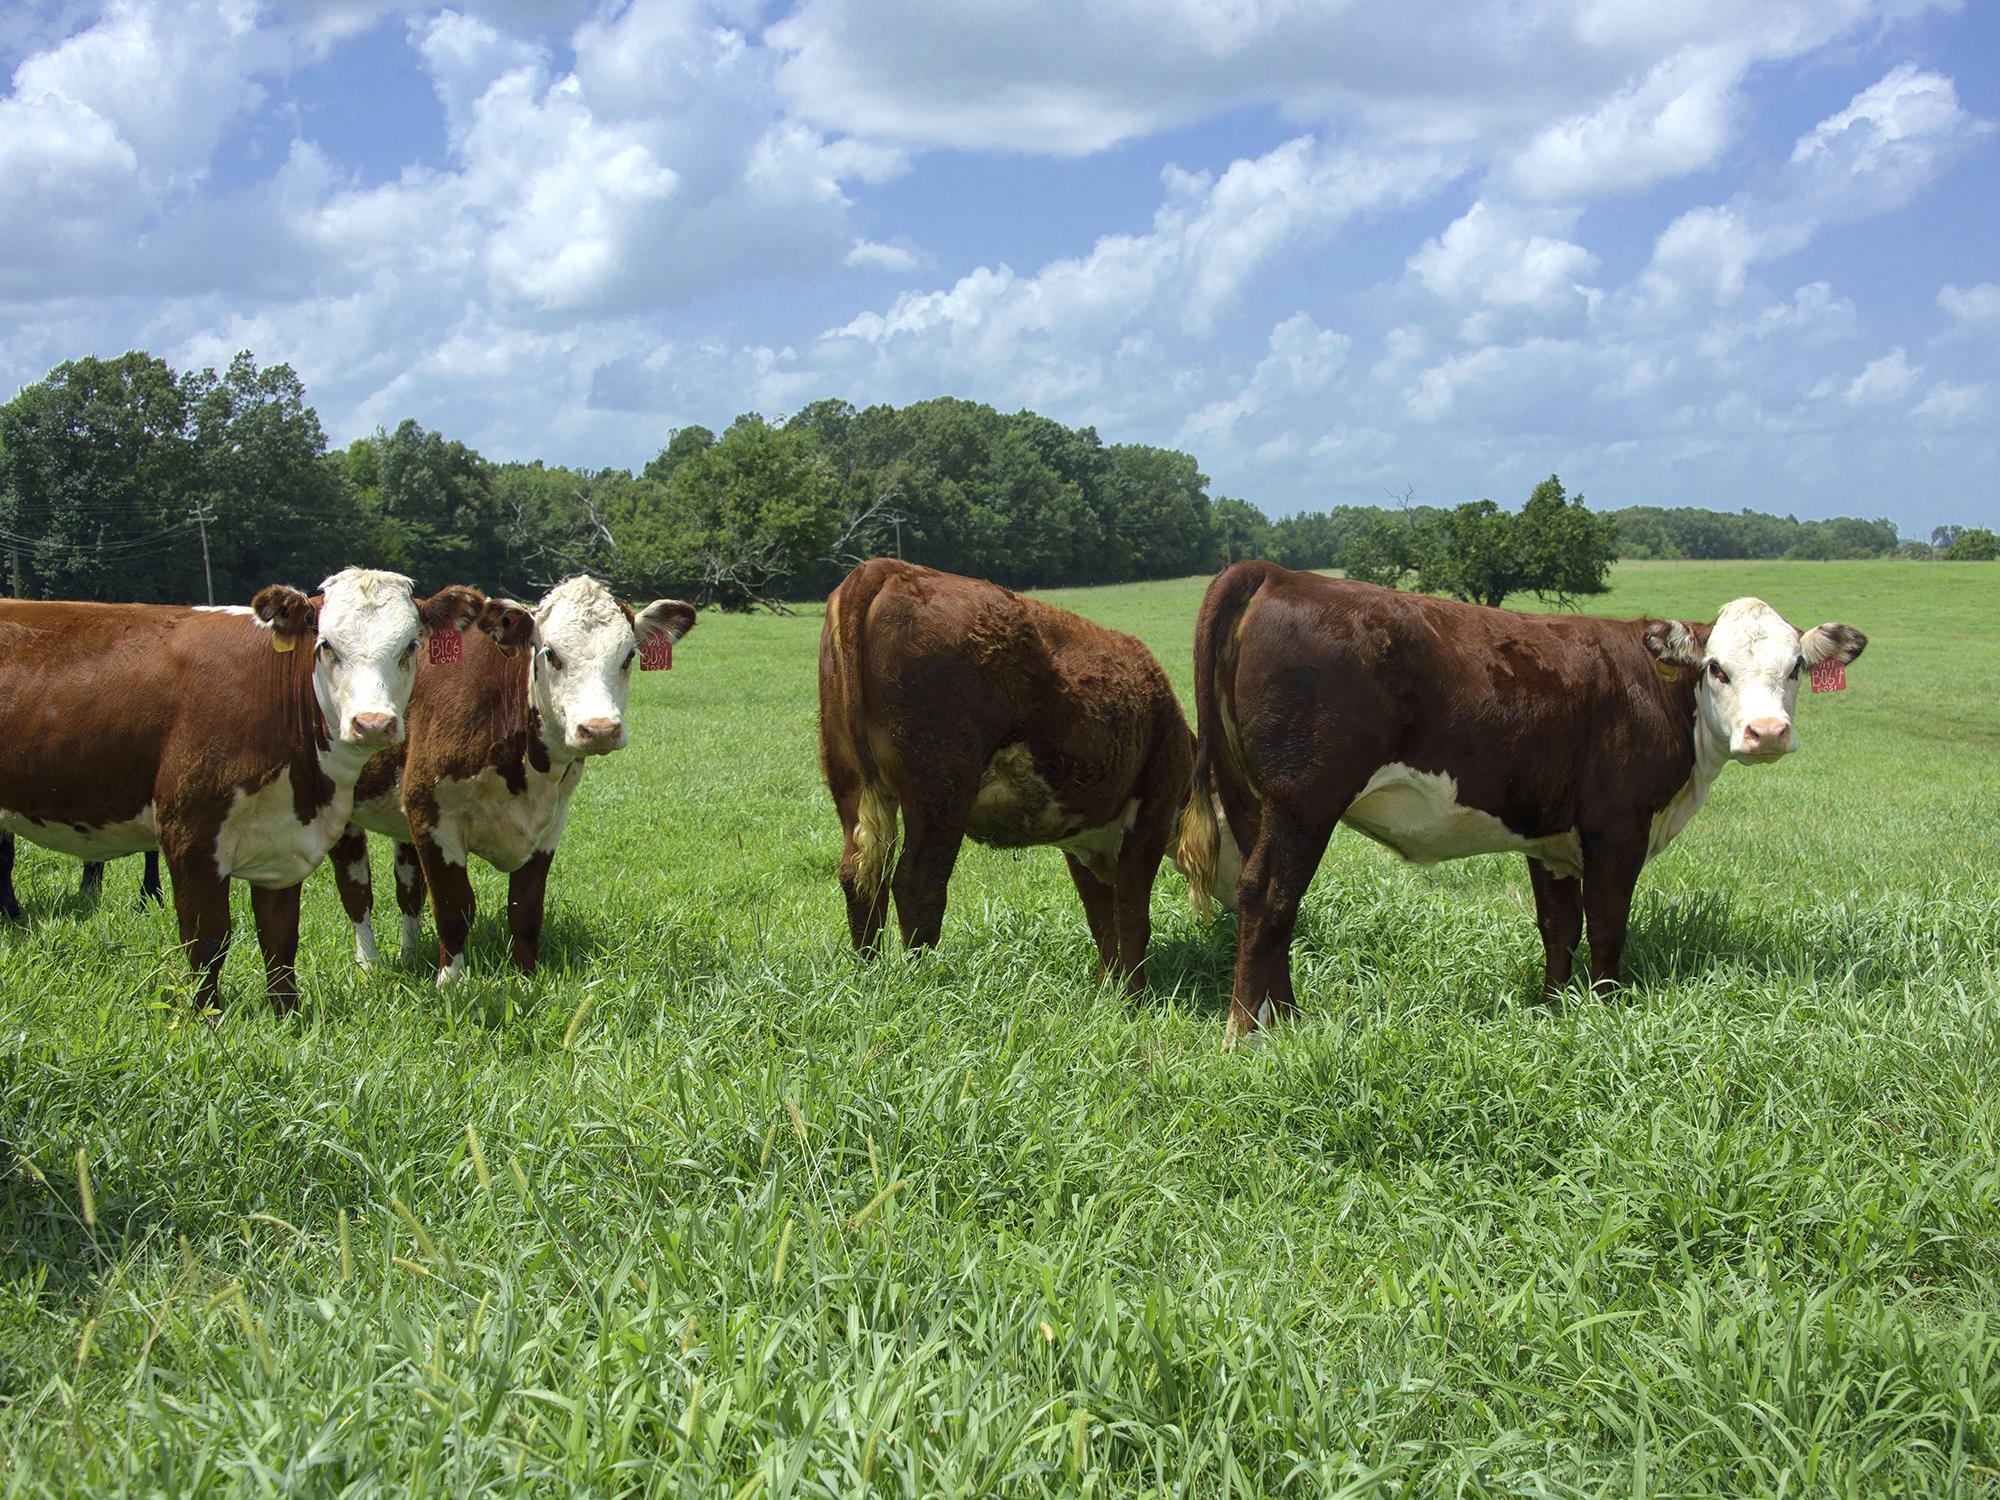 Shade from the summer sun is necessary to keep cattle cool and their feed intake high. These cattle were at the H.H. Leveck Animal Research Center at Mississippi State University in Starkville July 8, 2015. (Photo by MSU Ag Communications/Kevin Hudson)